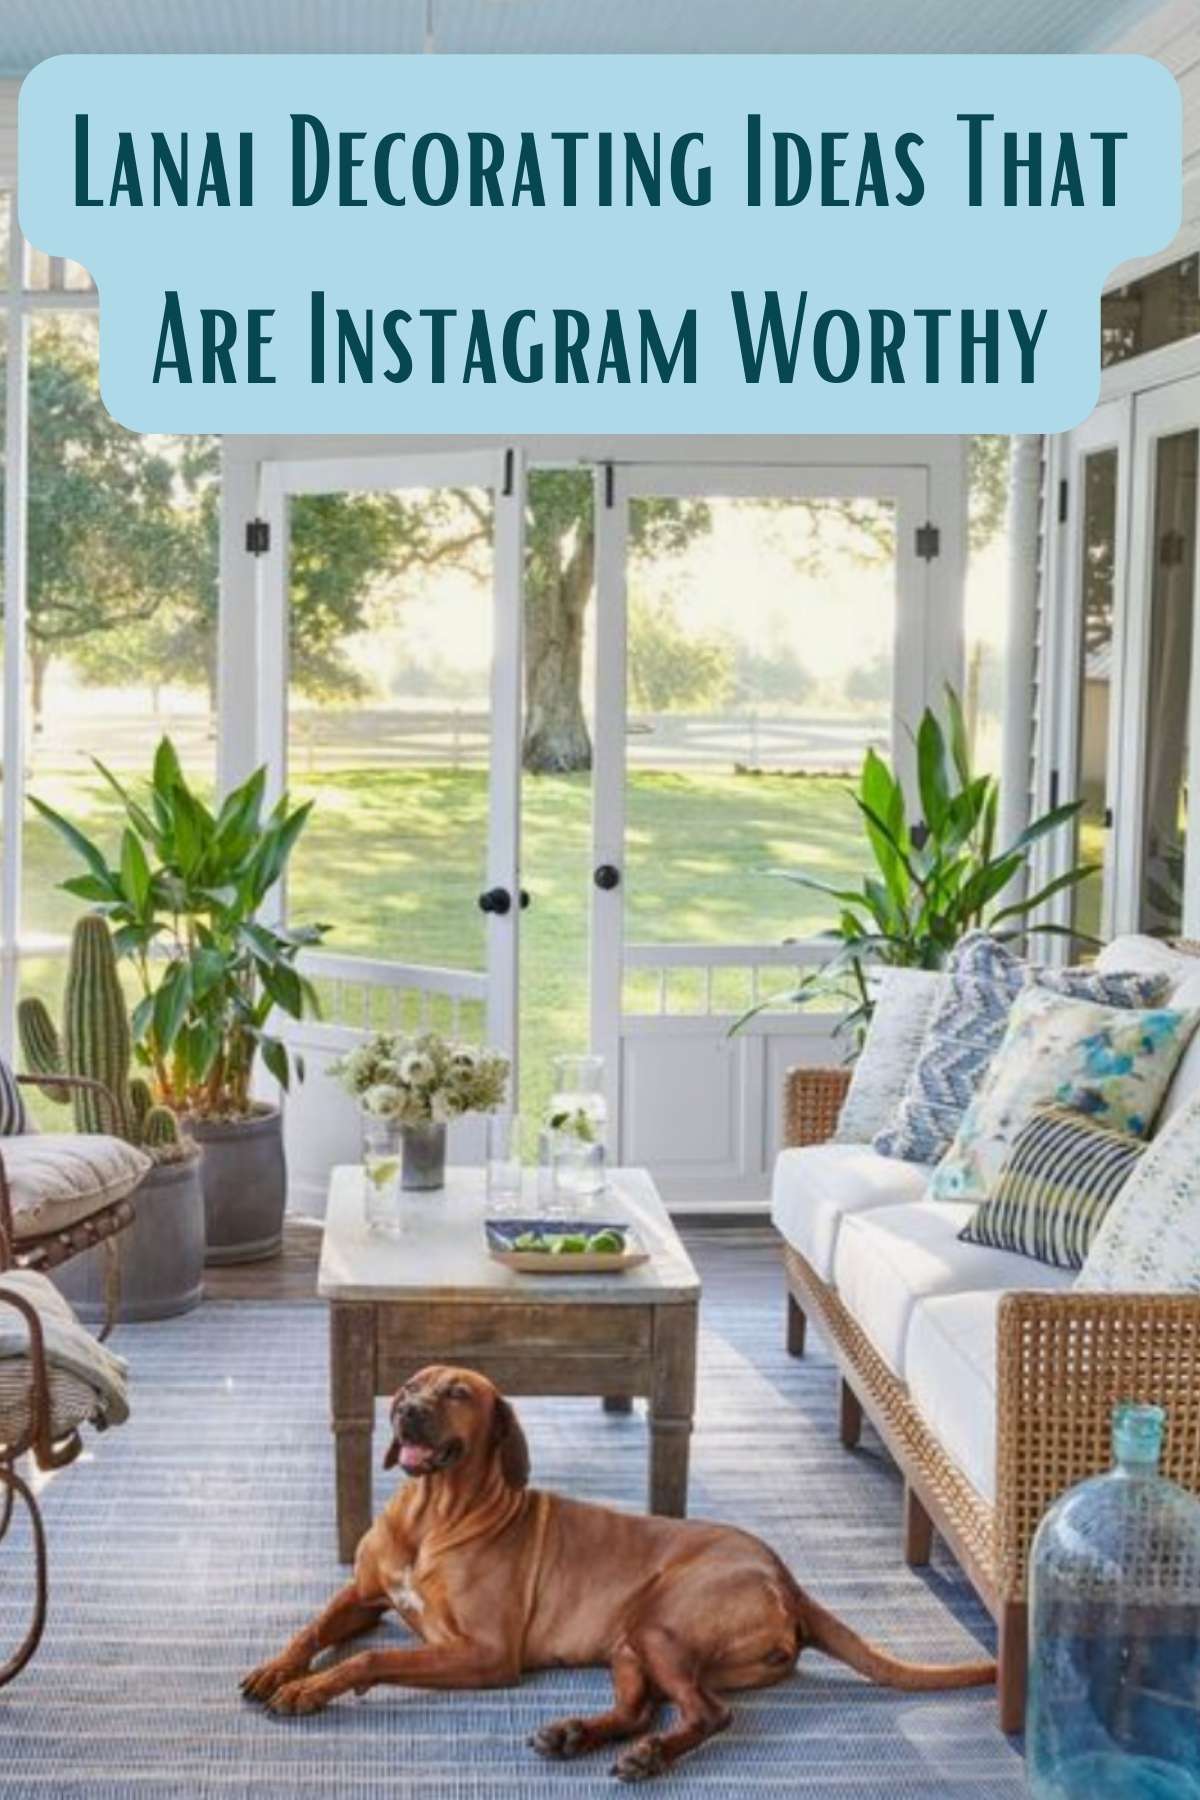 Lanai Decorating ideas that are instagram worth. photo of lanai with dog on it.